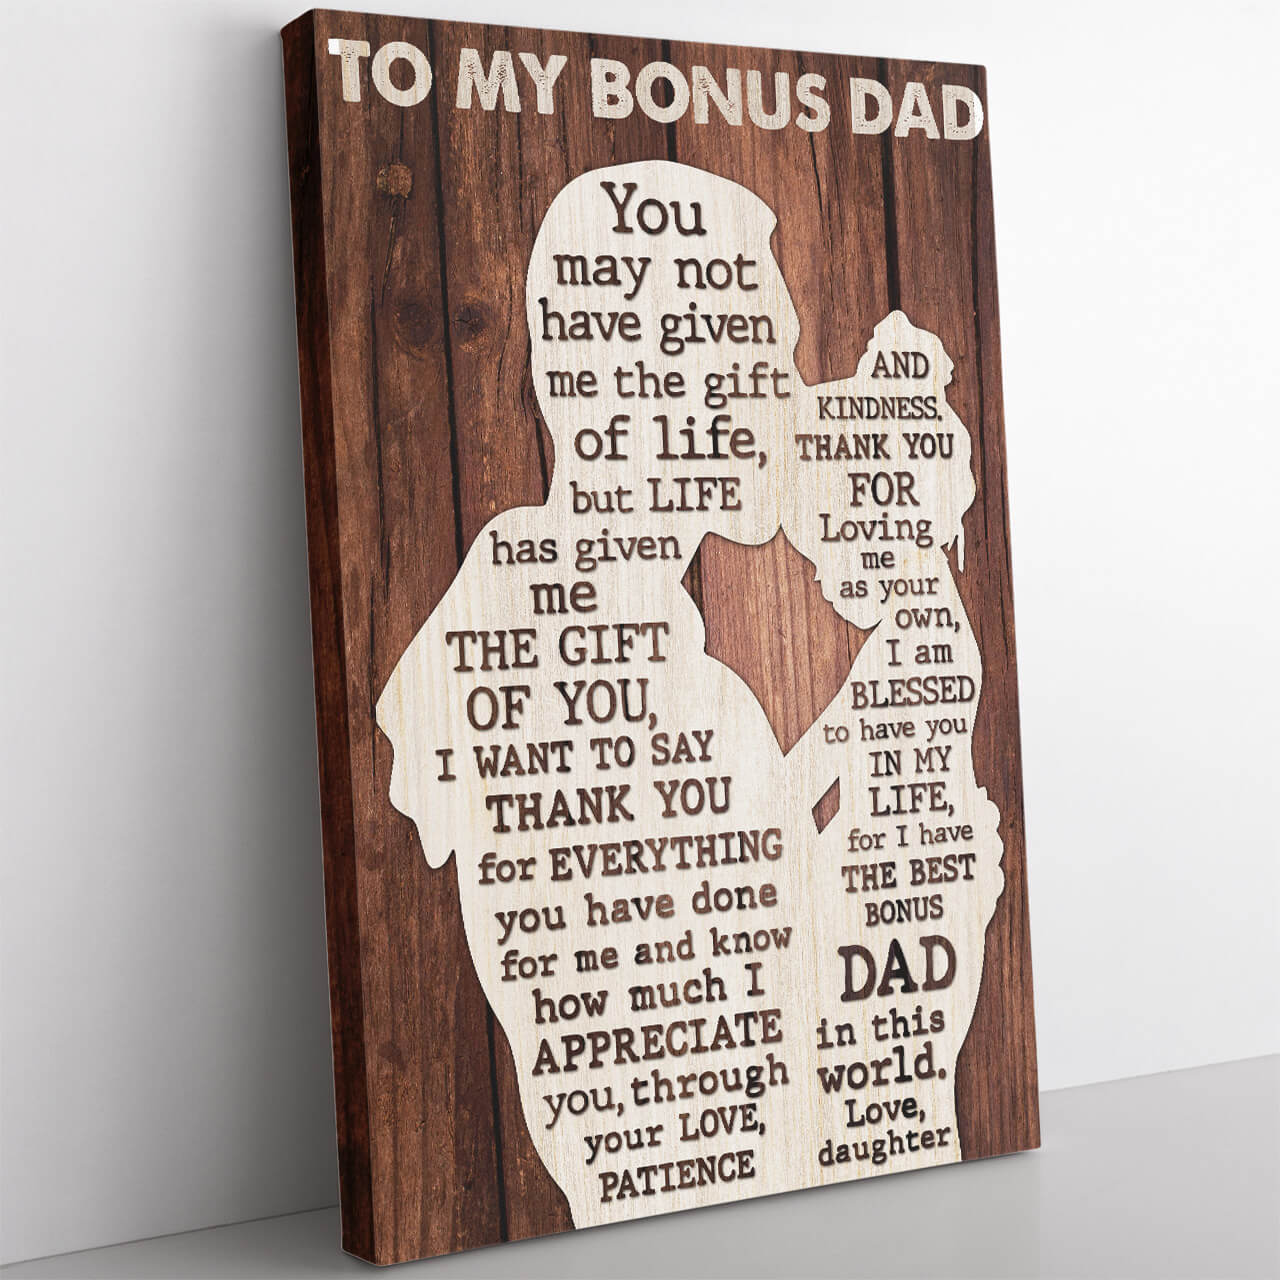 I Appreciate You Through your Love Patience Kindness To My Bonus Dad from Daughter Canvas